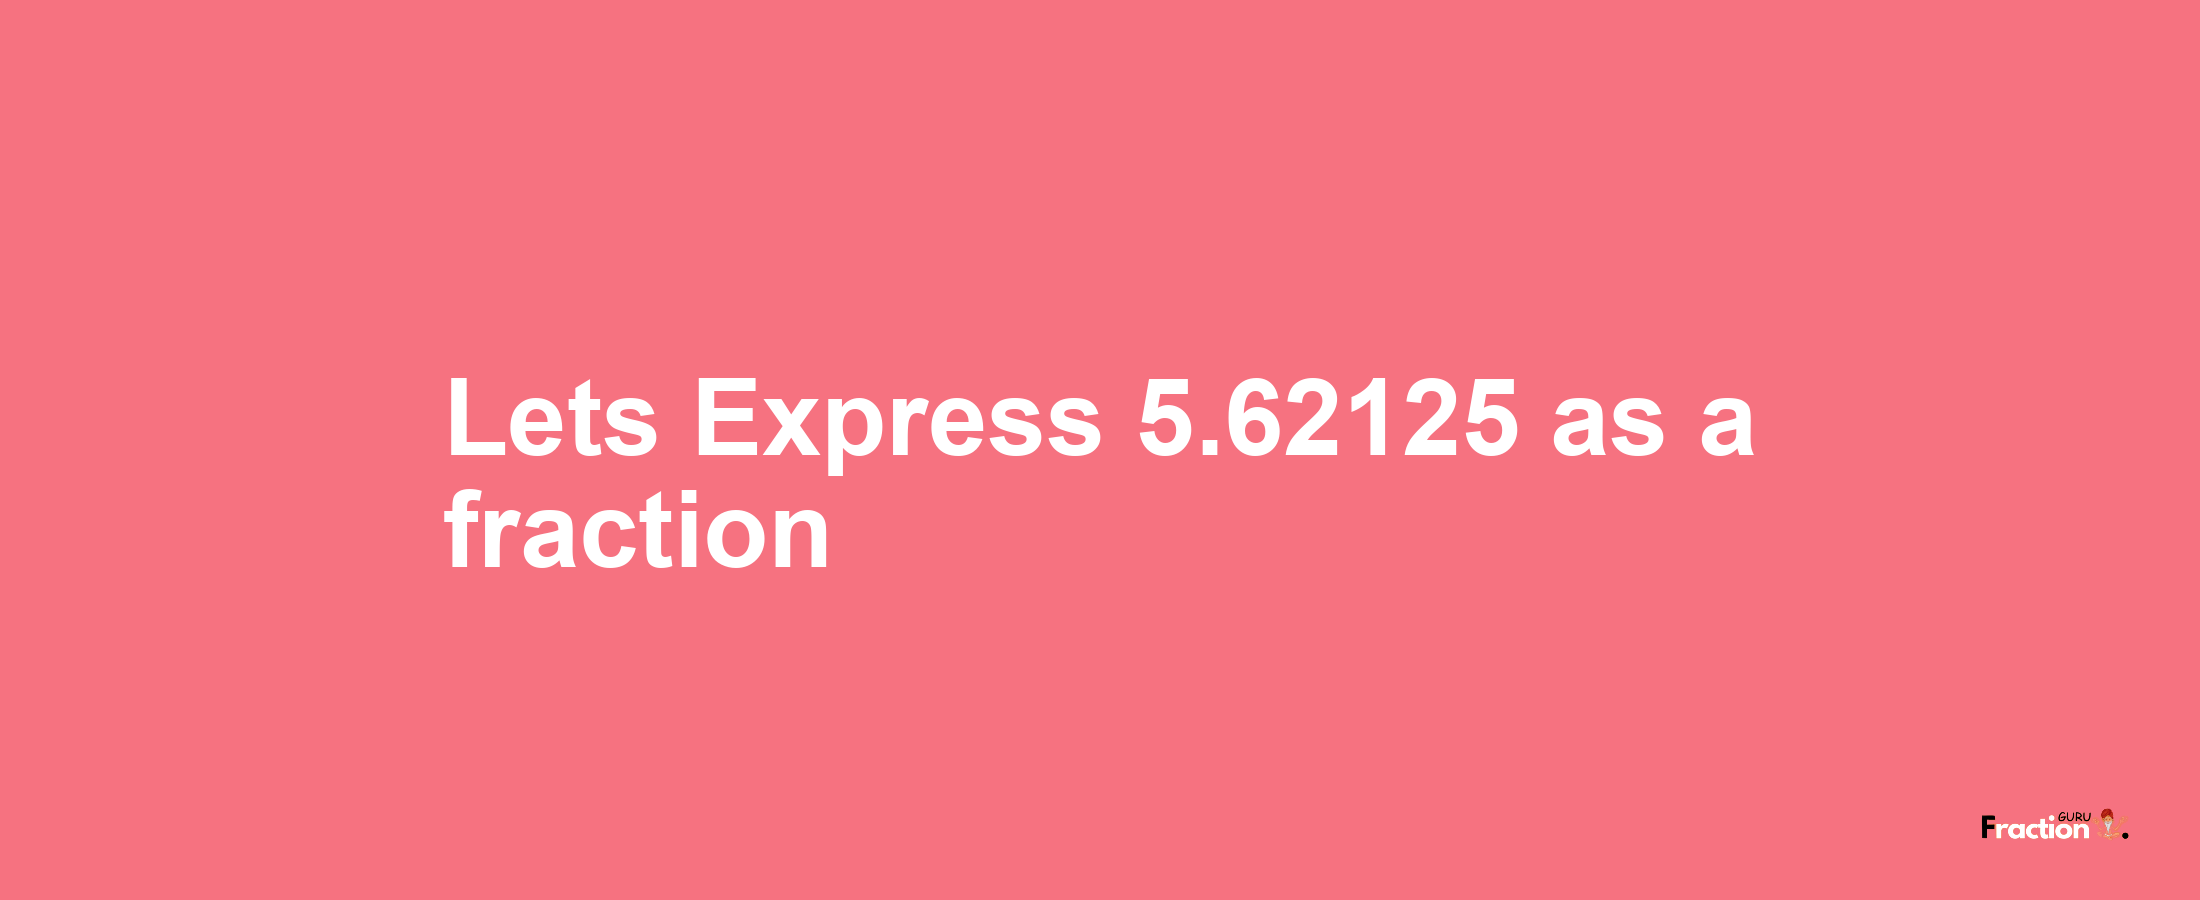 Lets Express 5.62125 as afraction